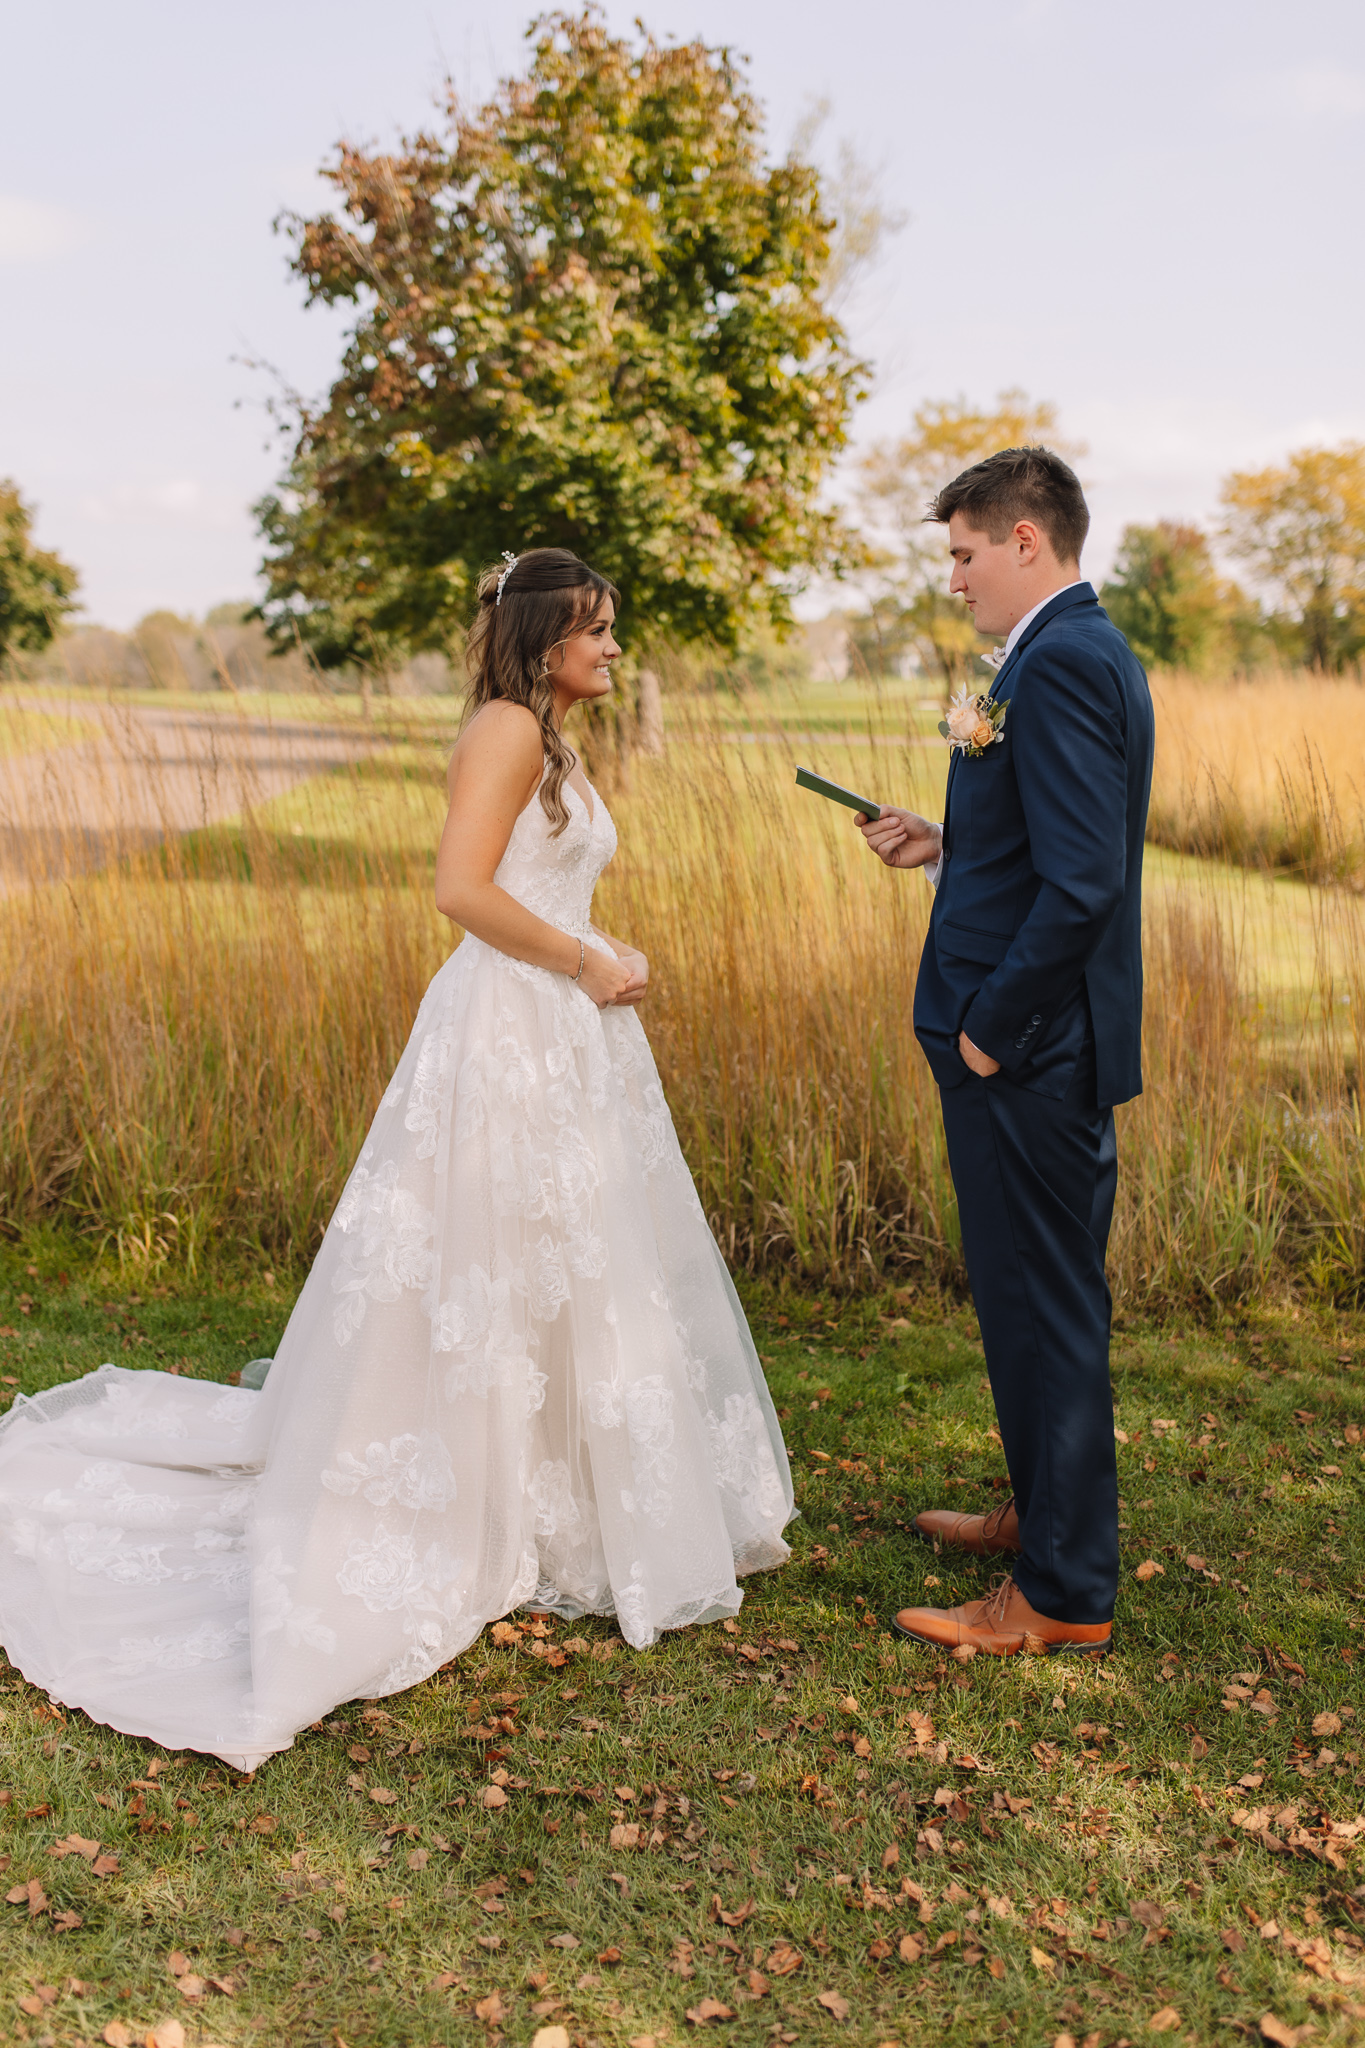 Bride and Groom exchanging personal vows during their first look on a golf course wedding venue in Minnesota